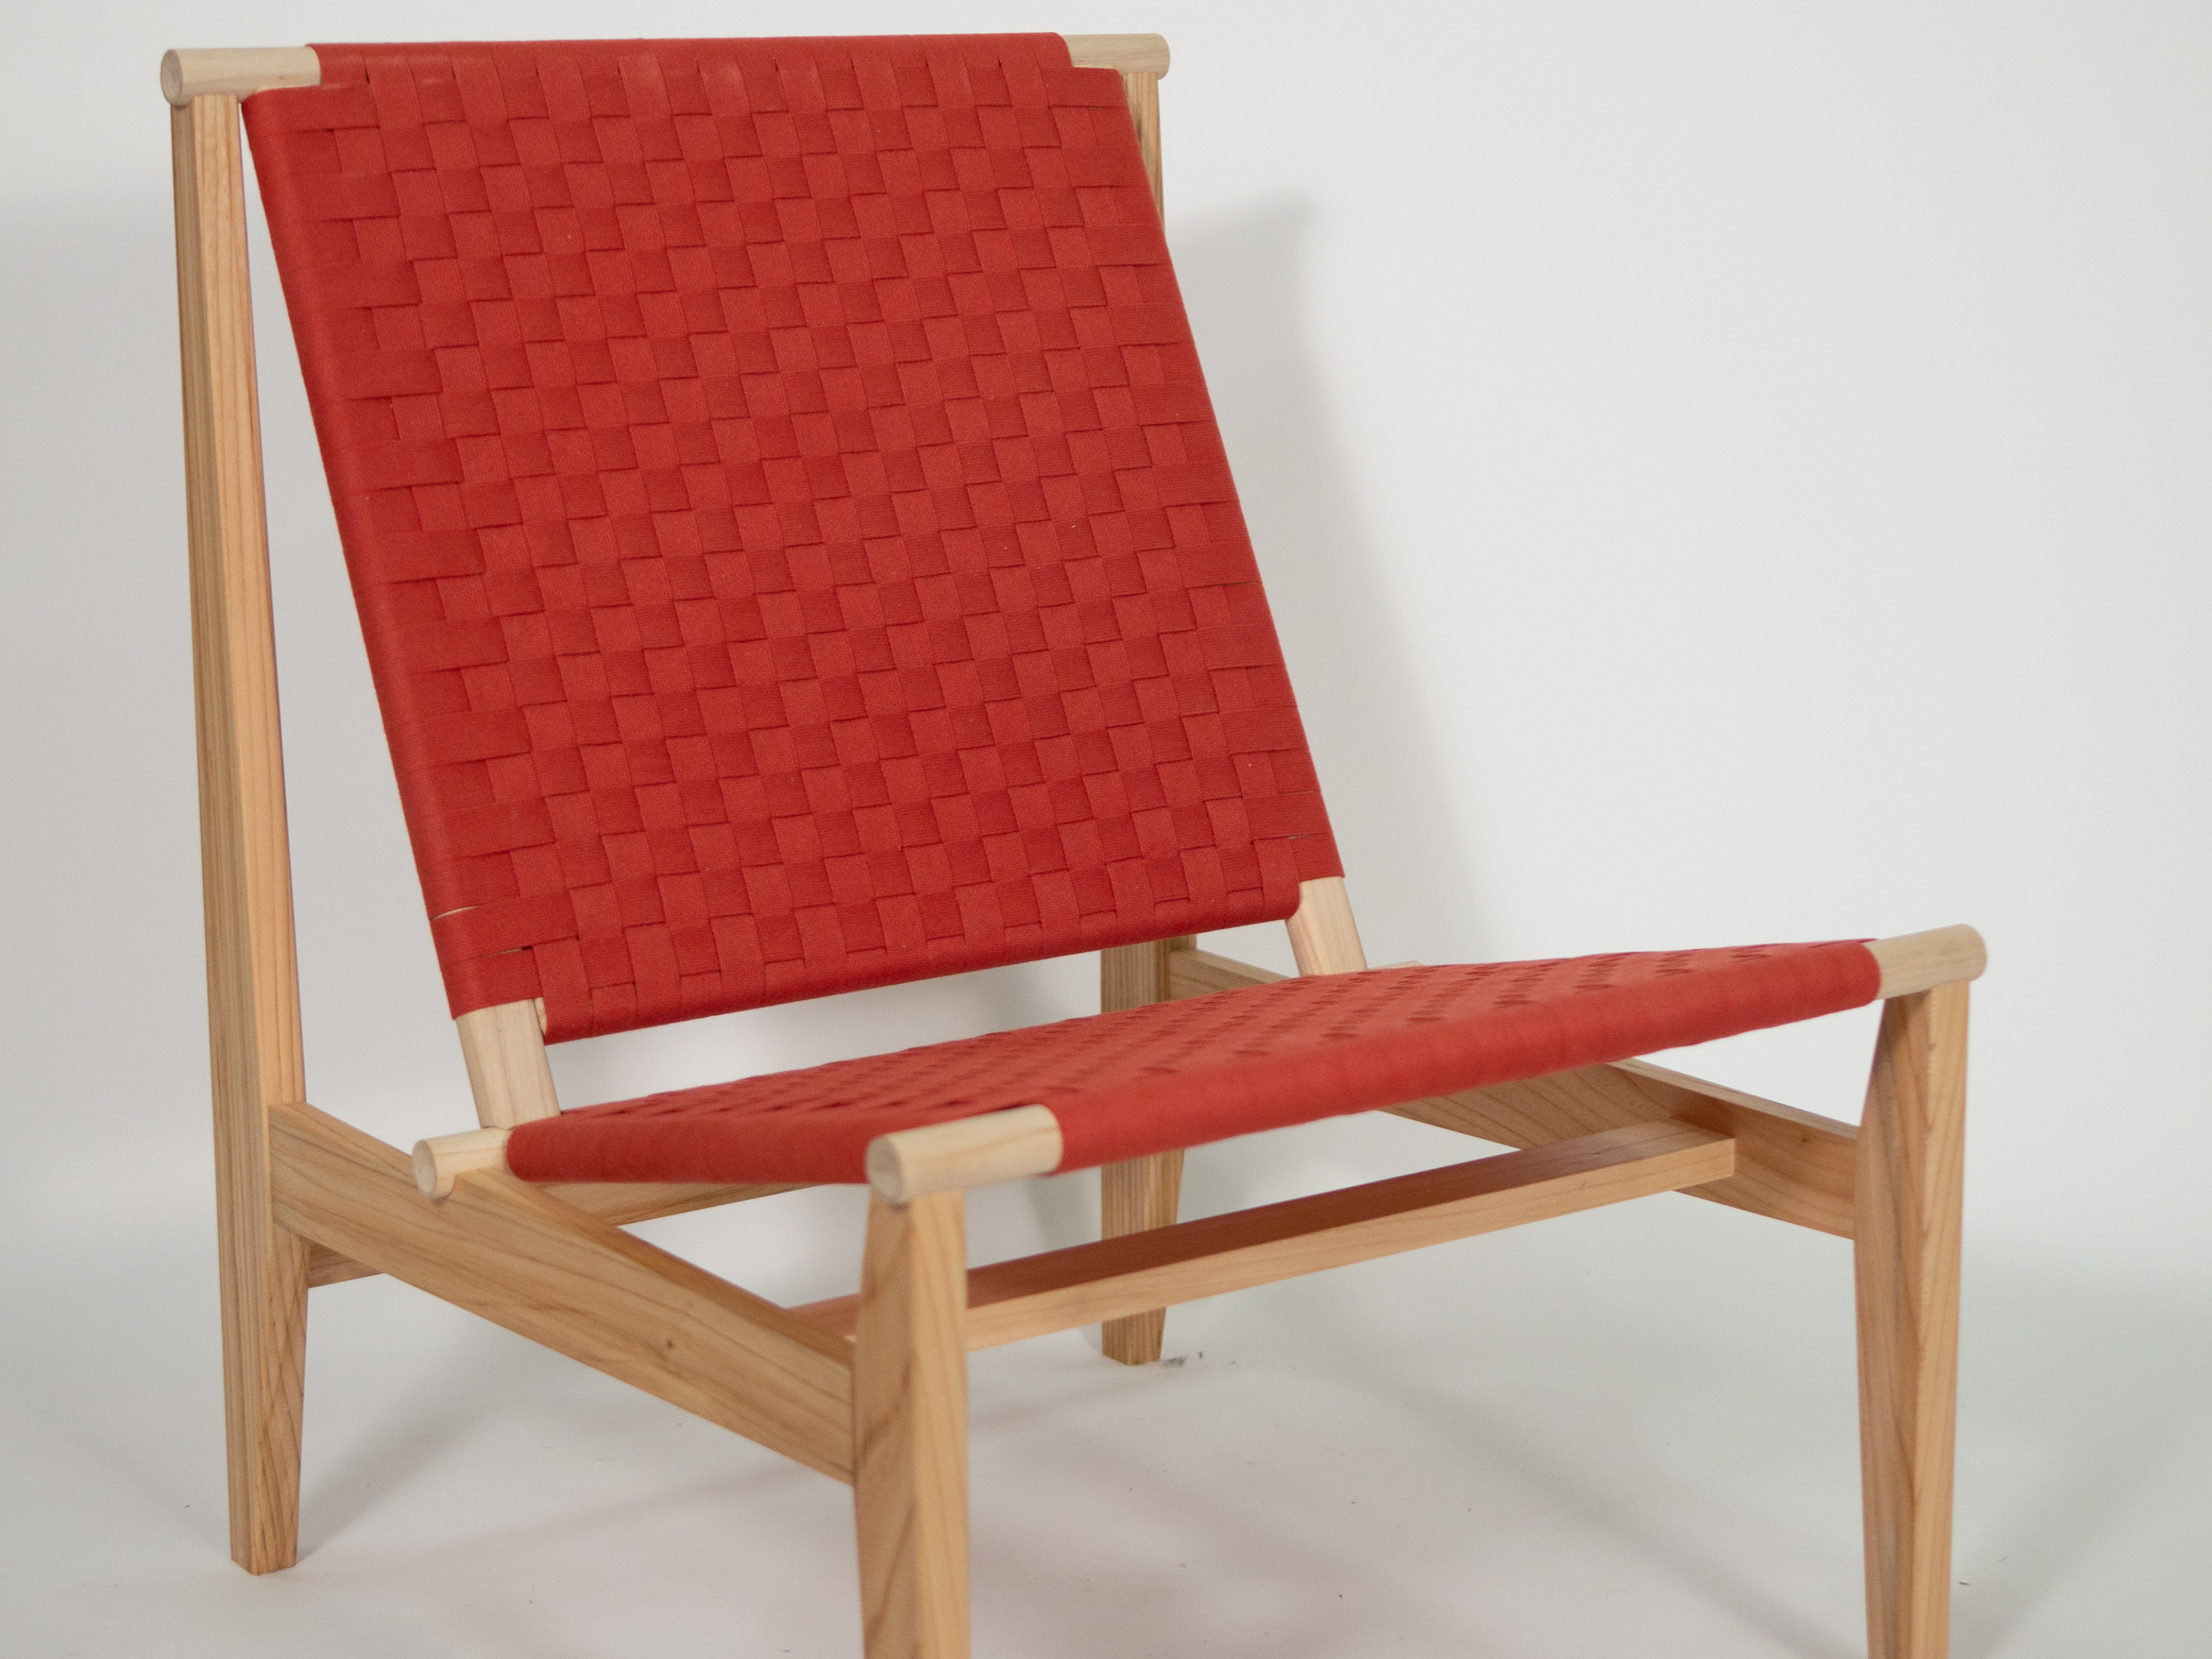 Chair designed by Peter Ostergaard